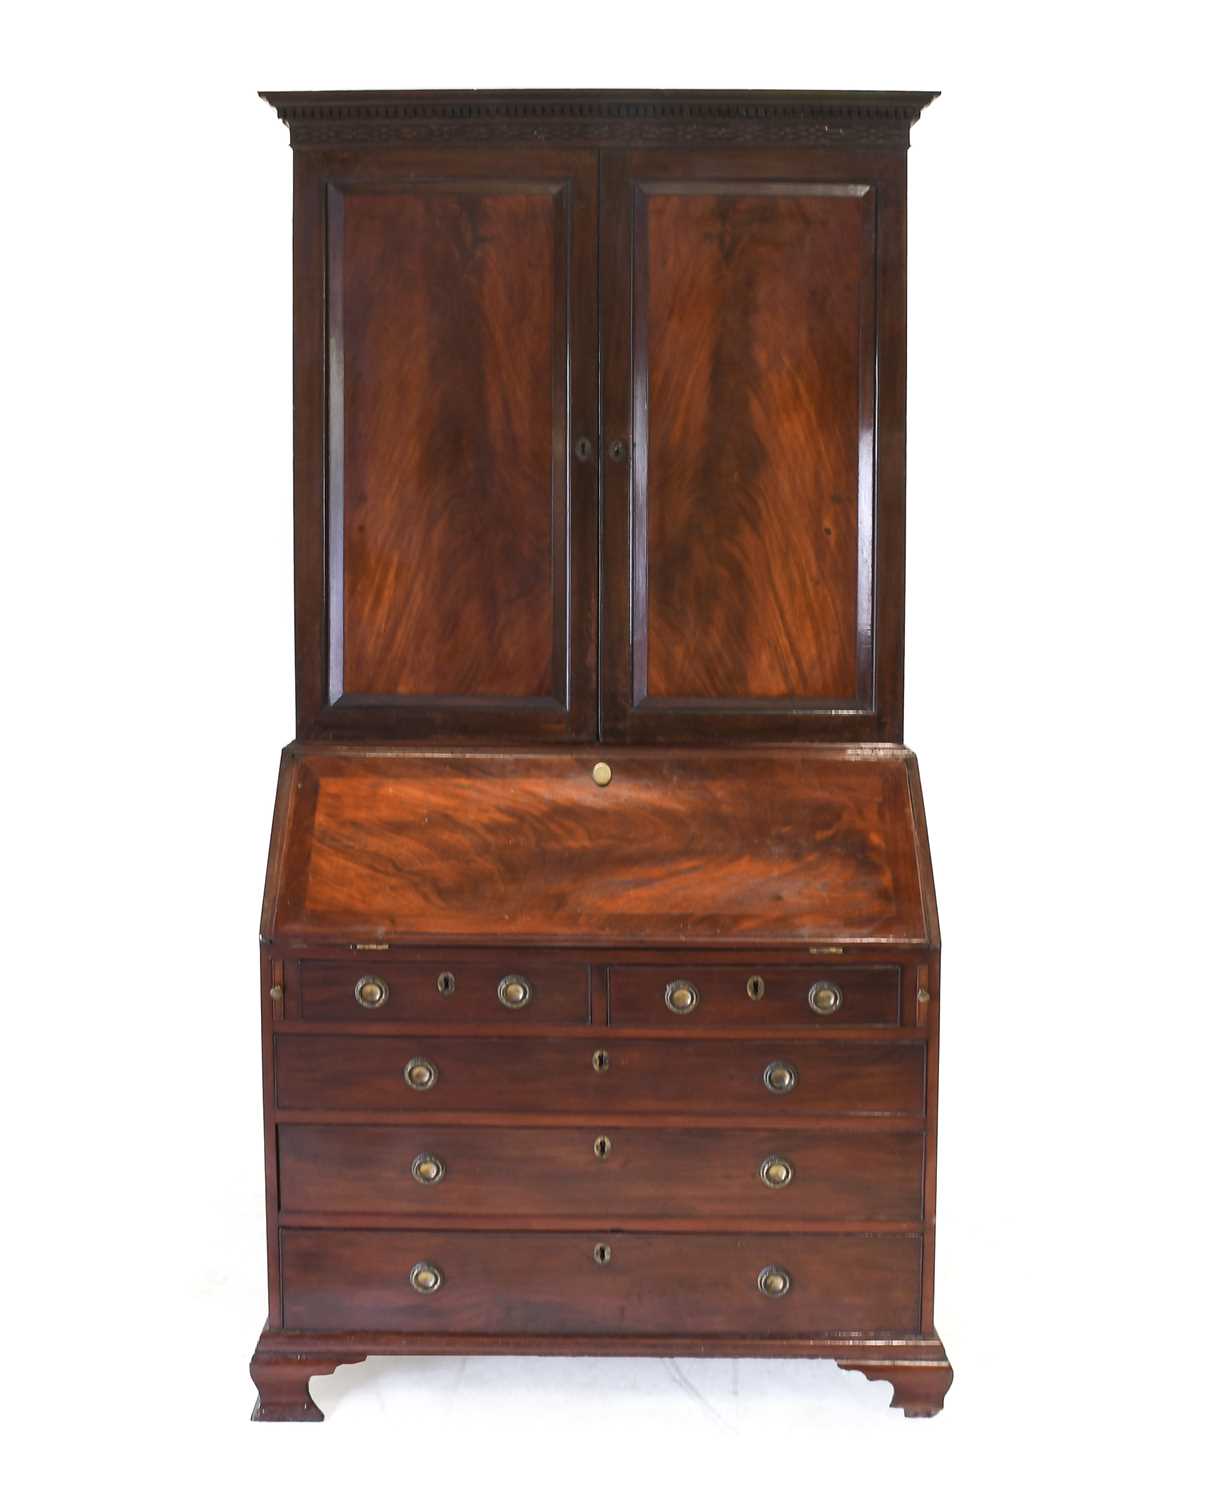 A George III Mahogany Bureau Bookcase, circa 1770, the moulded, dentil and blind fret-carved